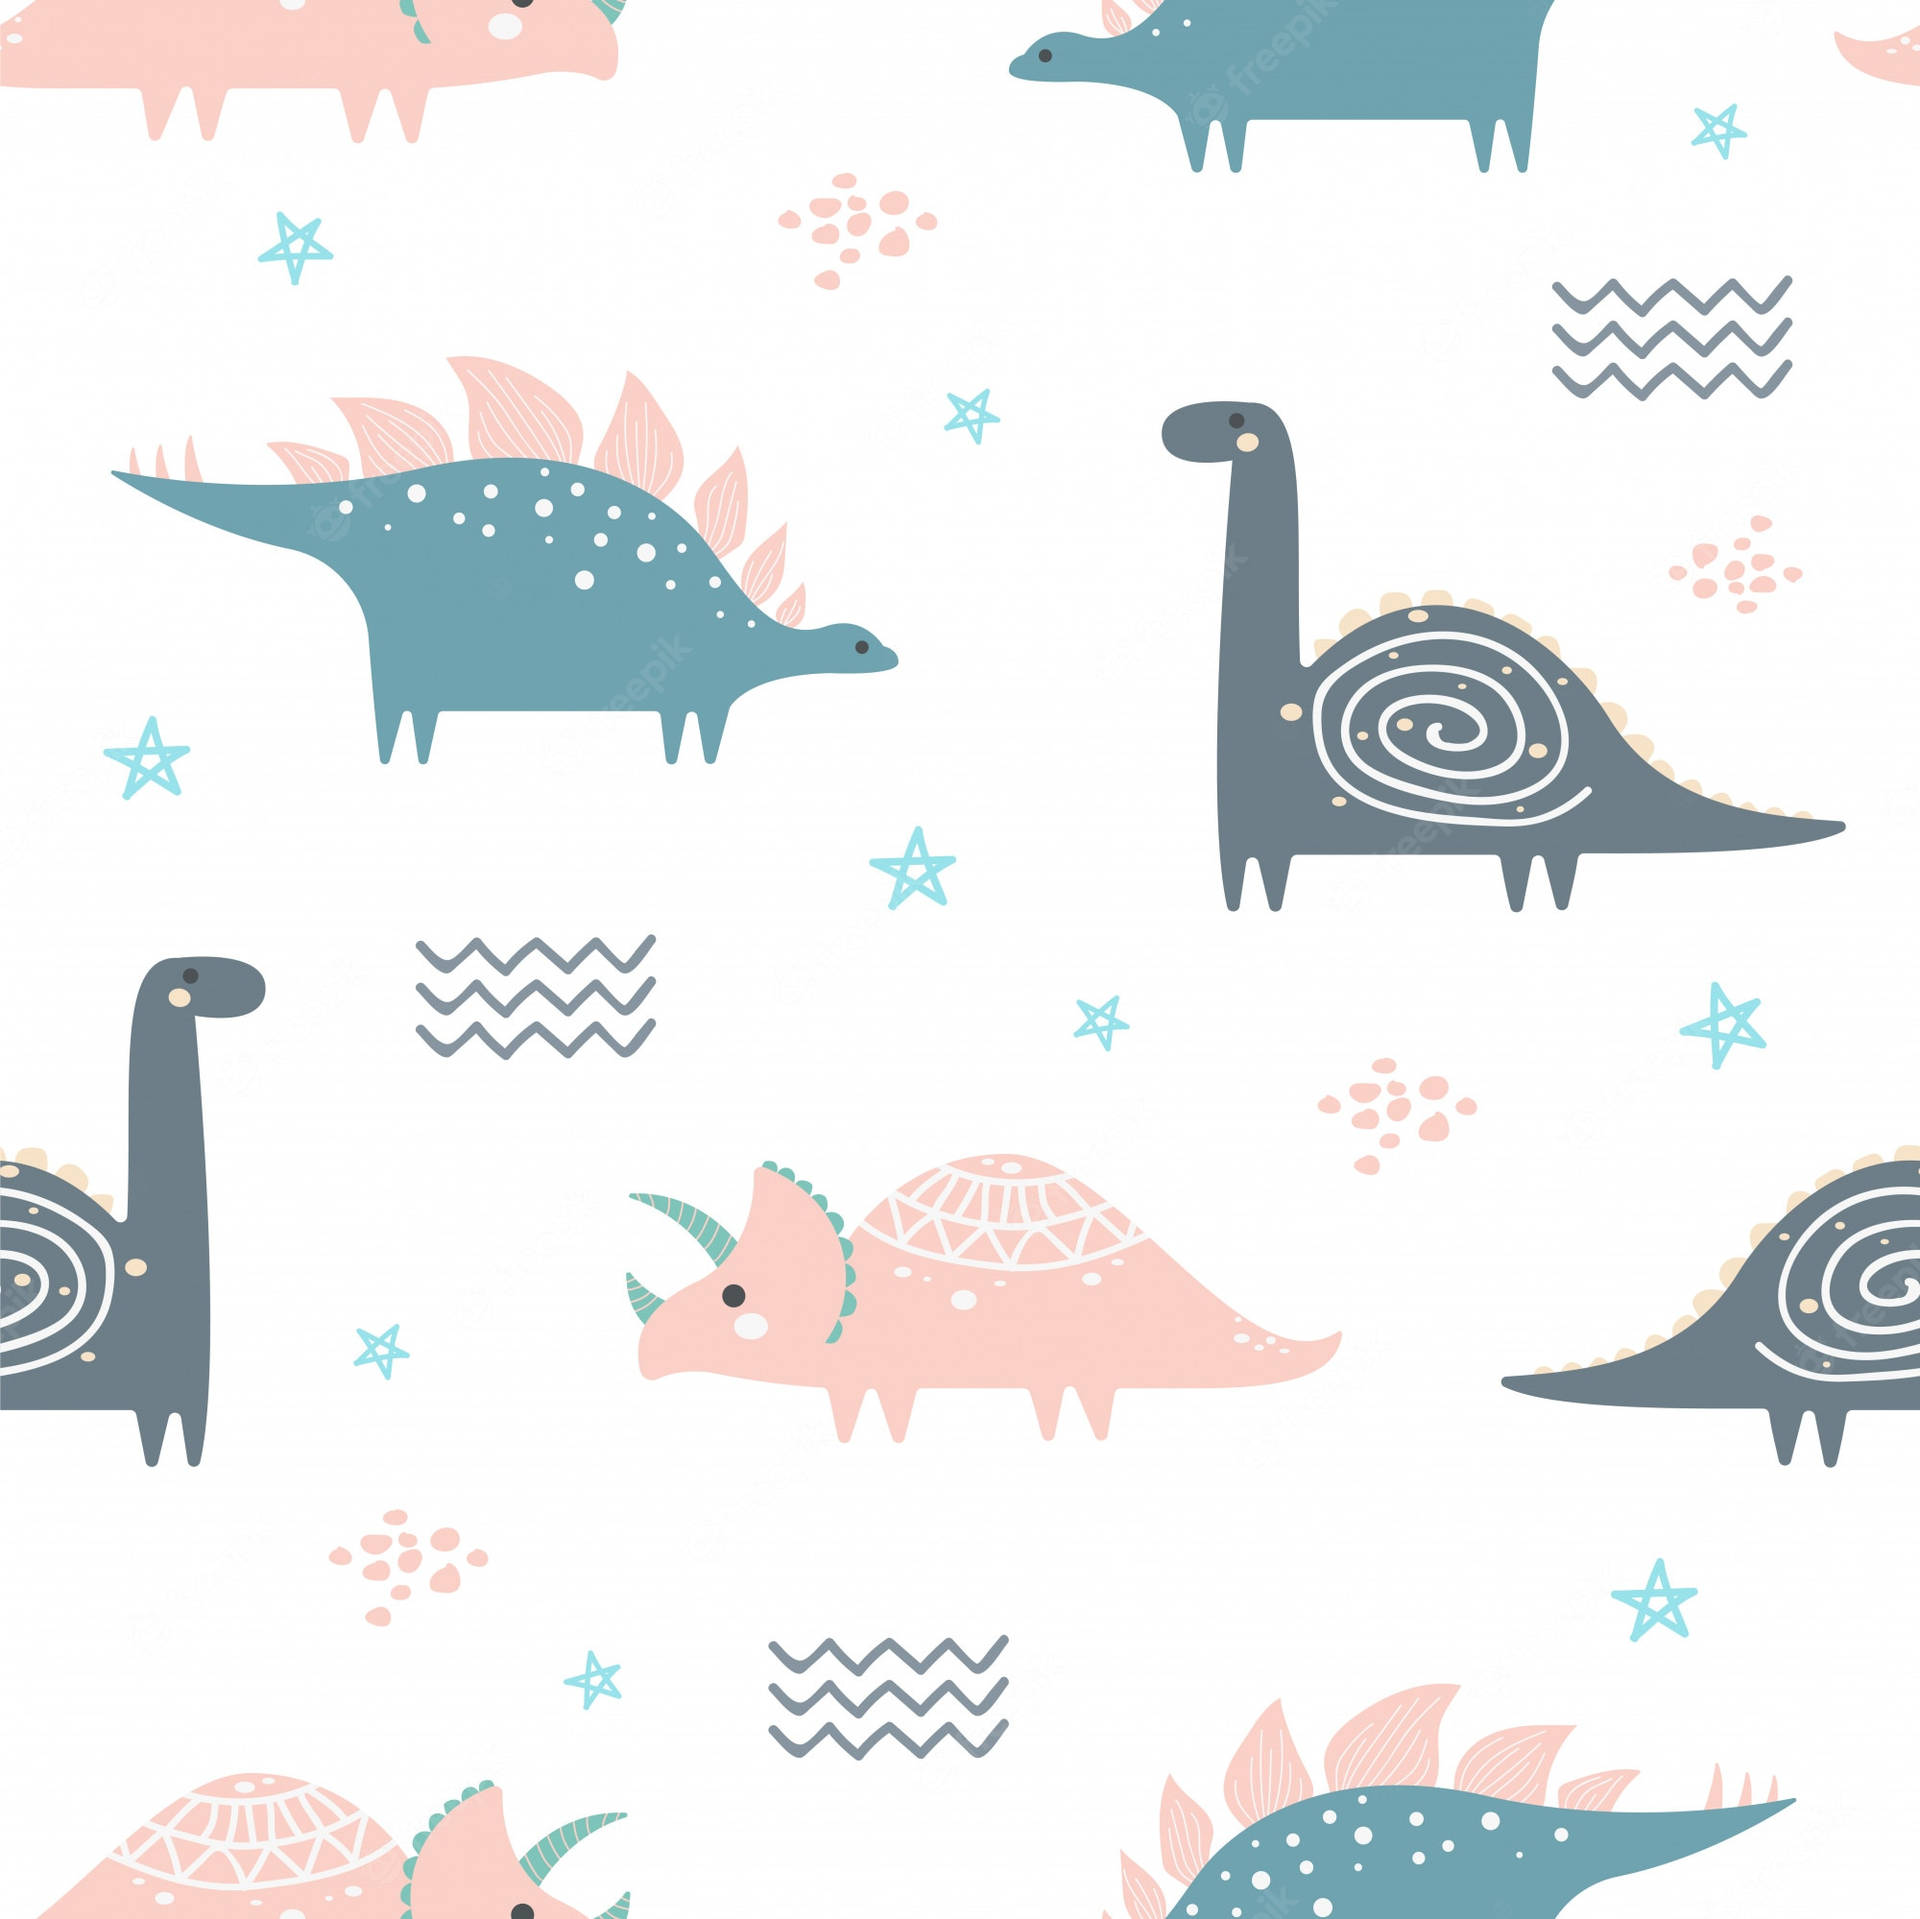 Cute Dinosaurs Pattern With Stars And Stars Wallpaper